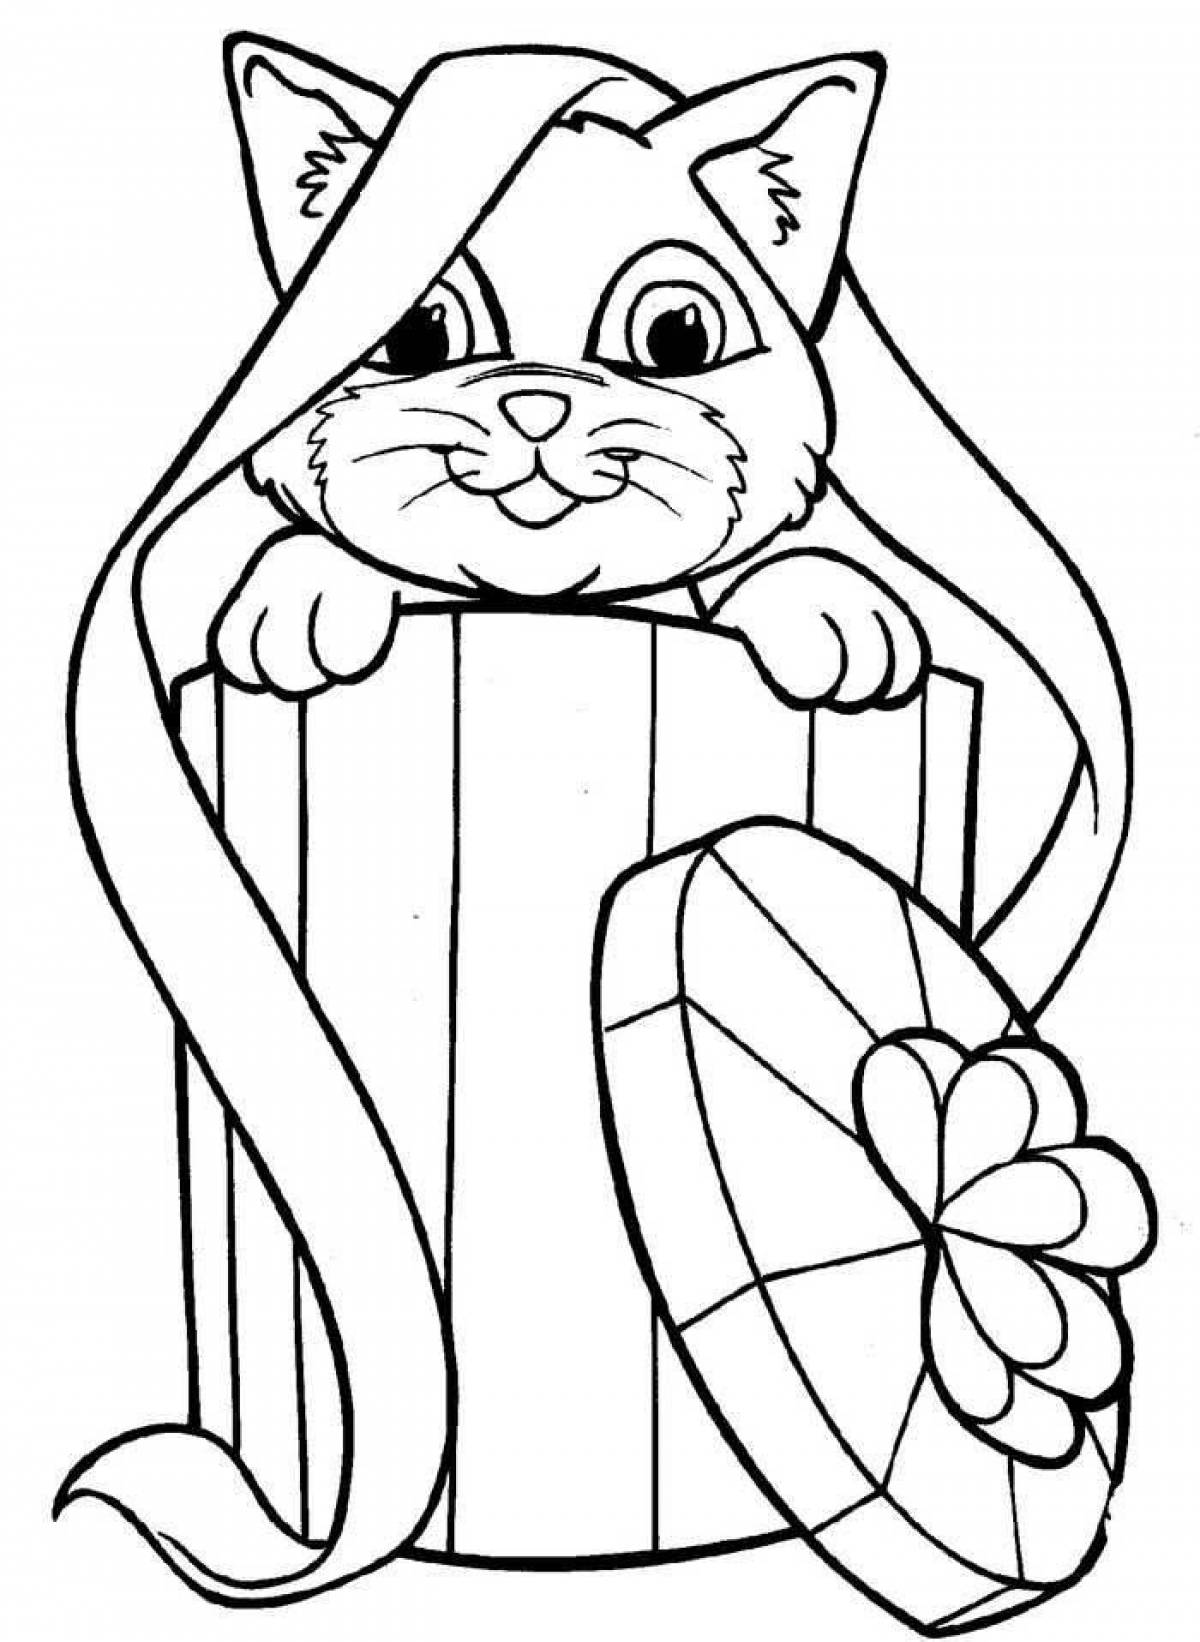 Curious coloring cat for children 6-7 years old